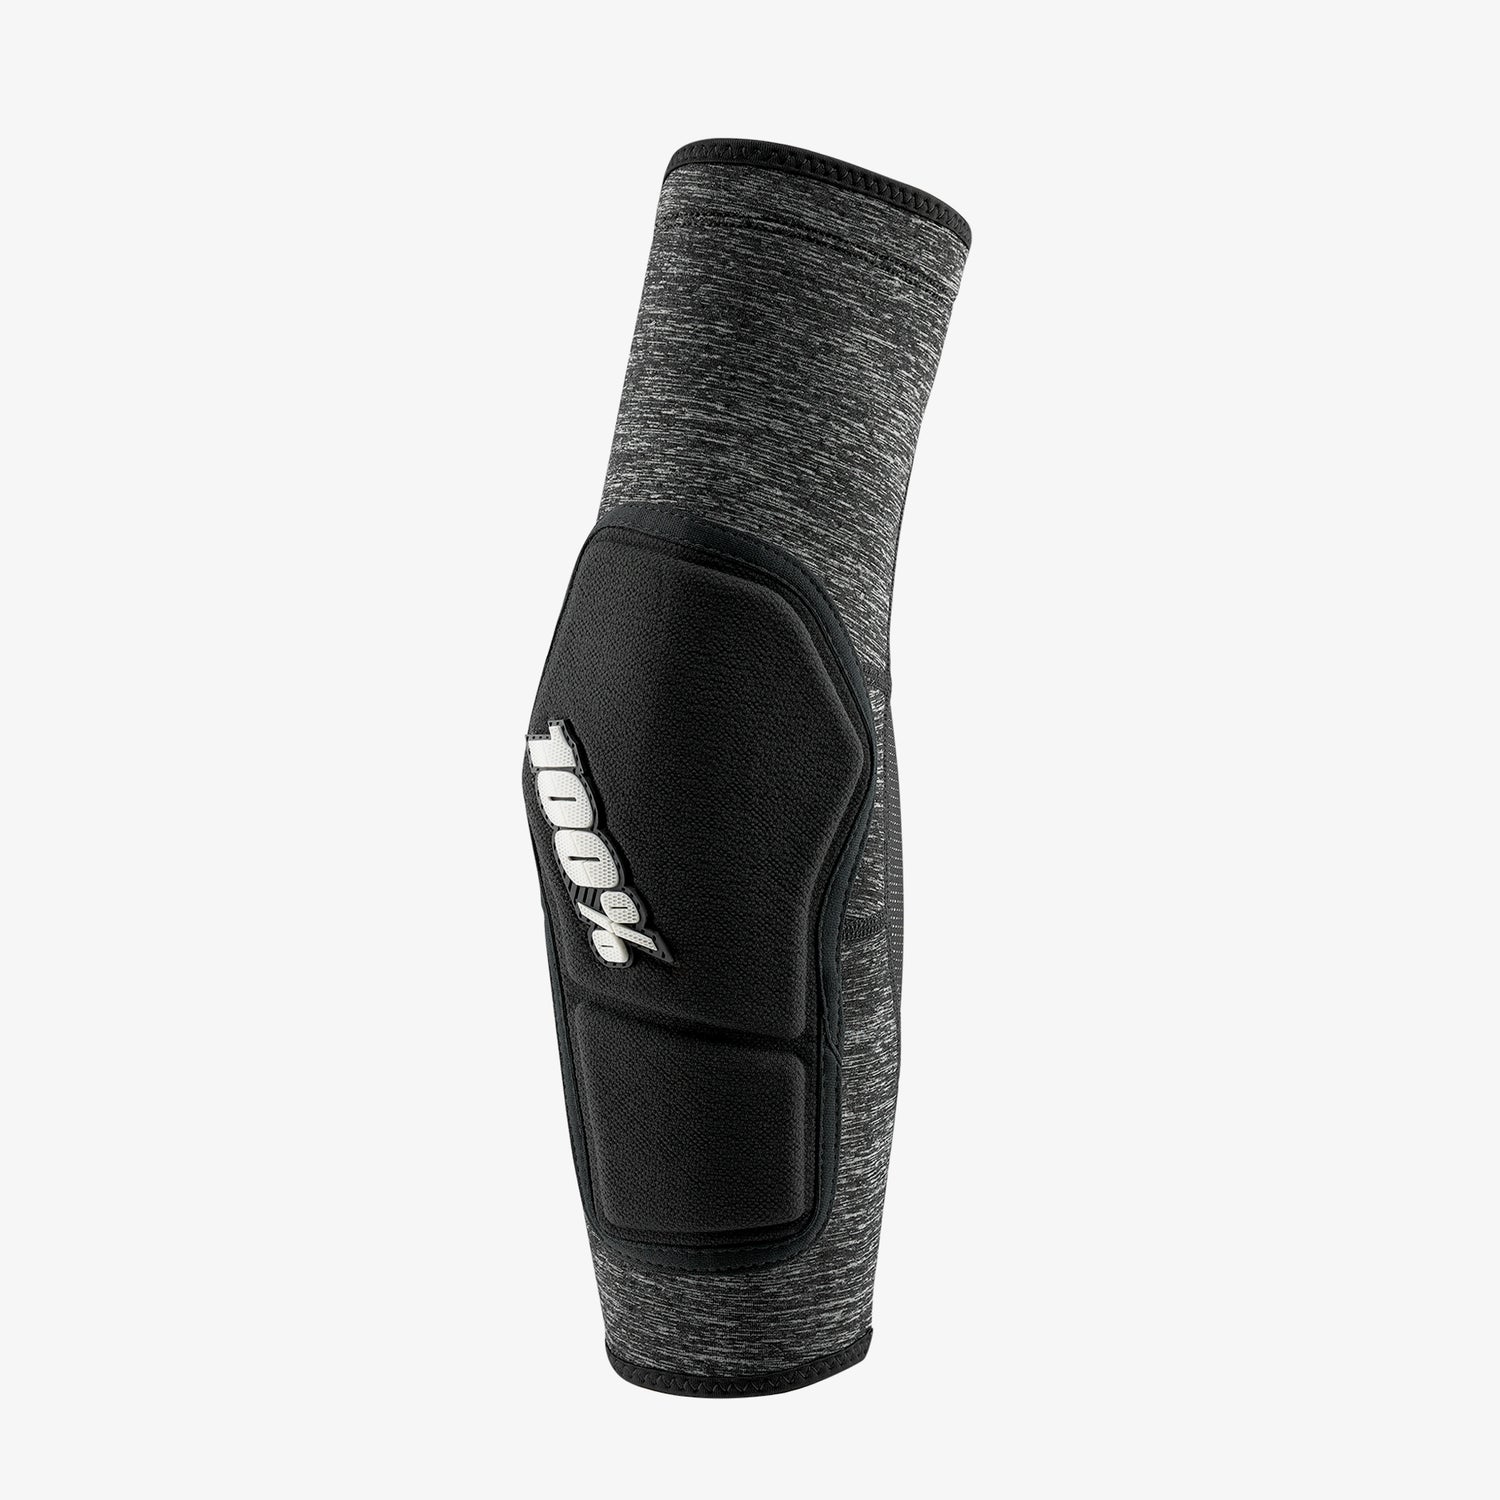 Black and Heathered Grey Elbow pad for biking, 100%